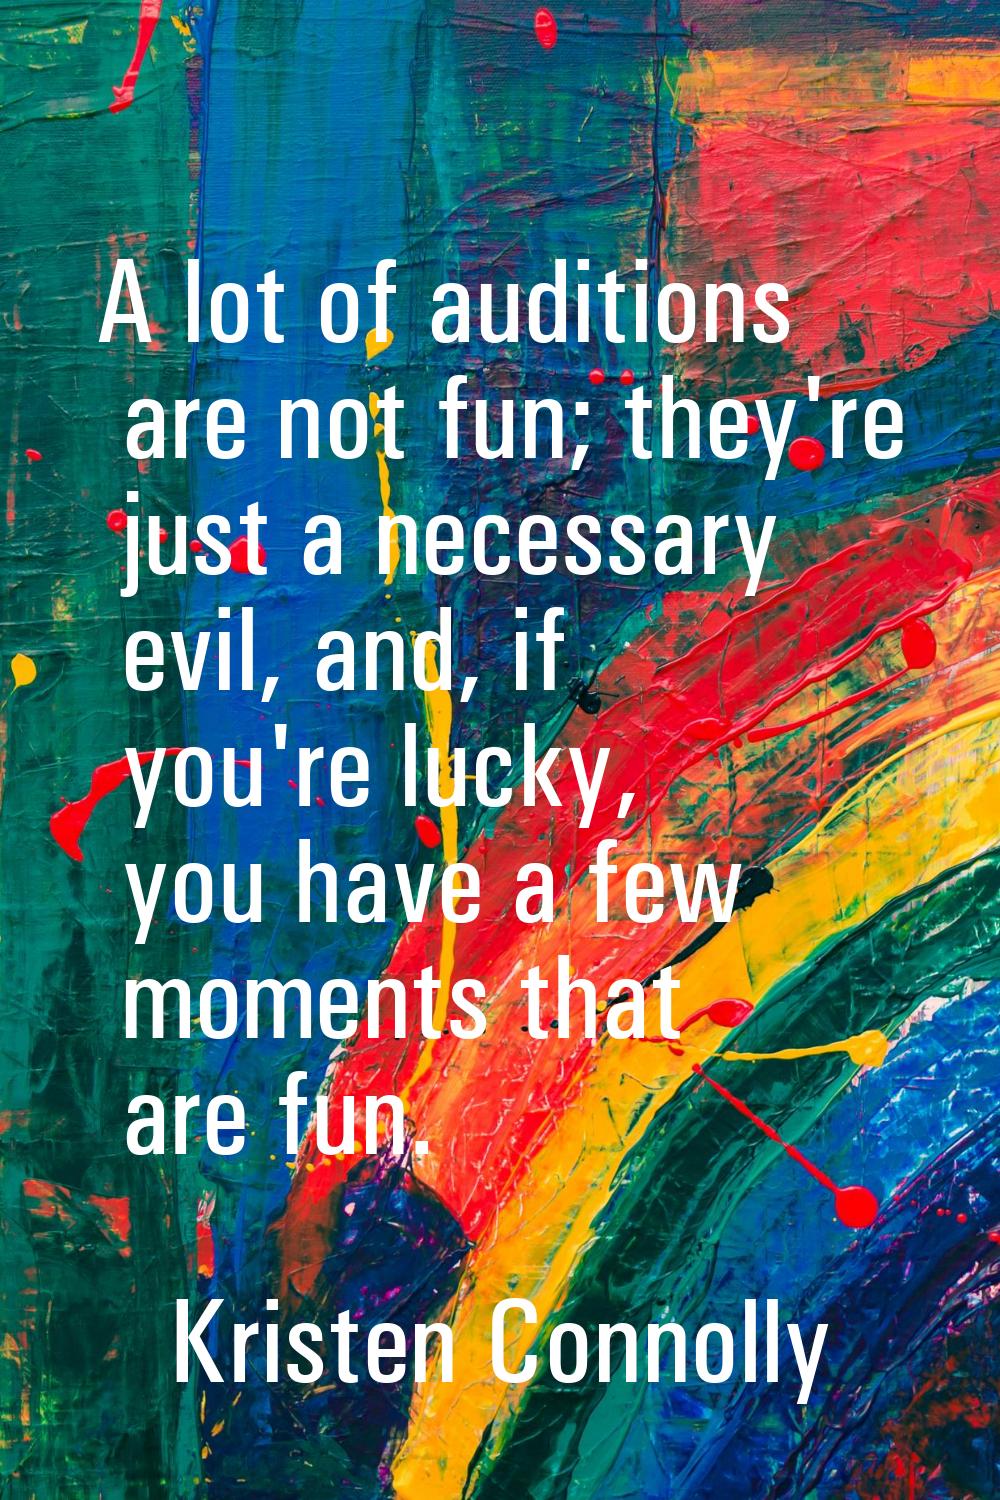 A lot of auditions are not fun; they're just a necessary evil, and, if you're lucky, you have a few